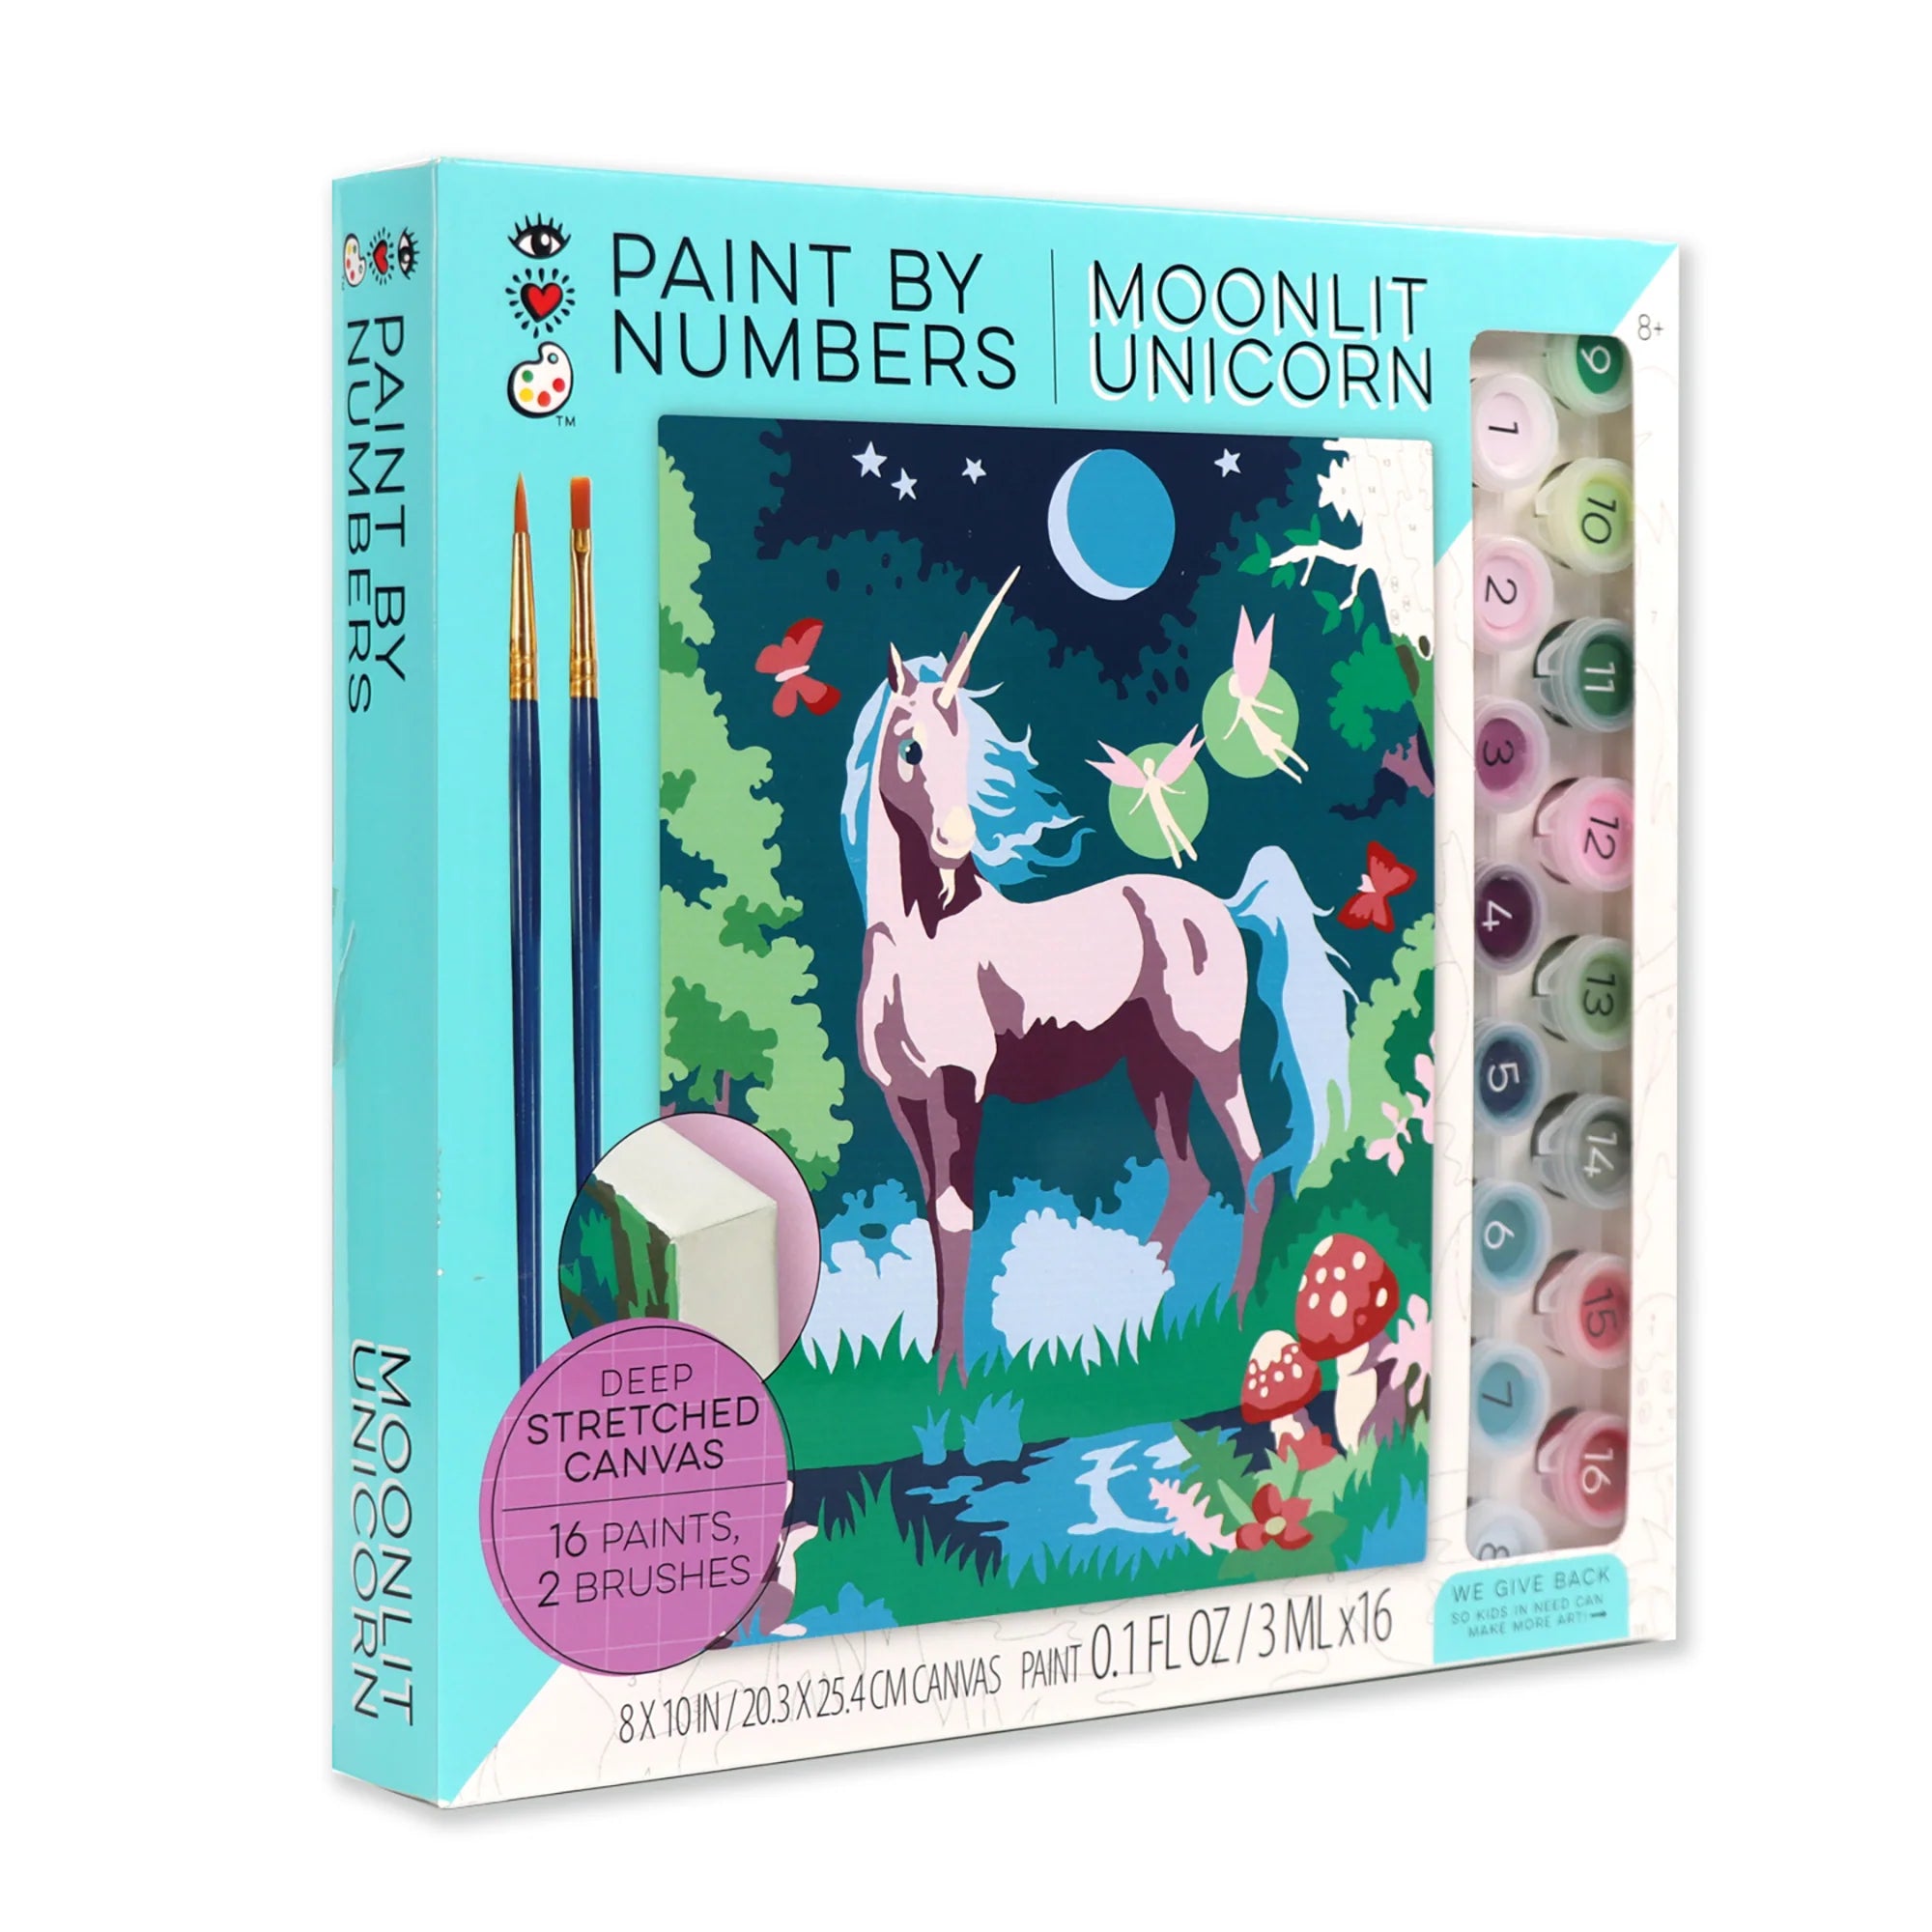 Paint by Numbers - Moonlit Unicorn from iHeartArt